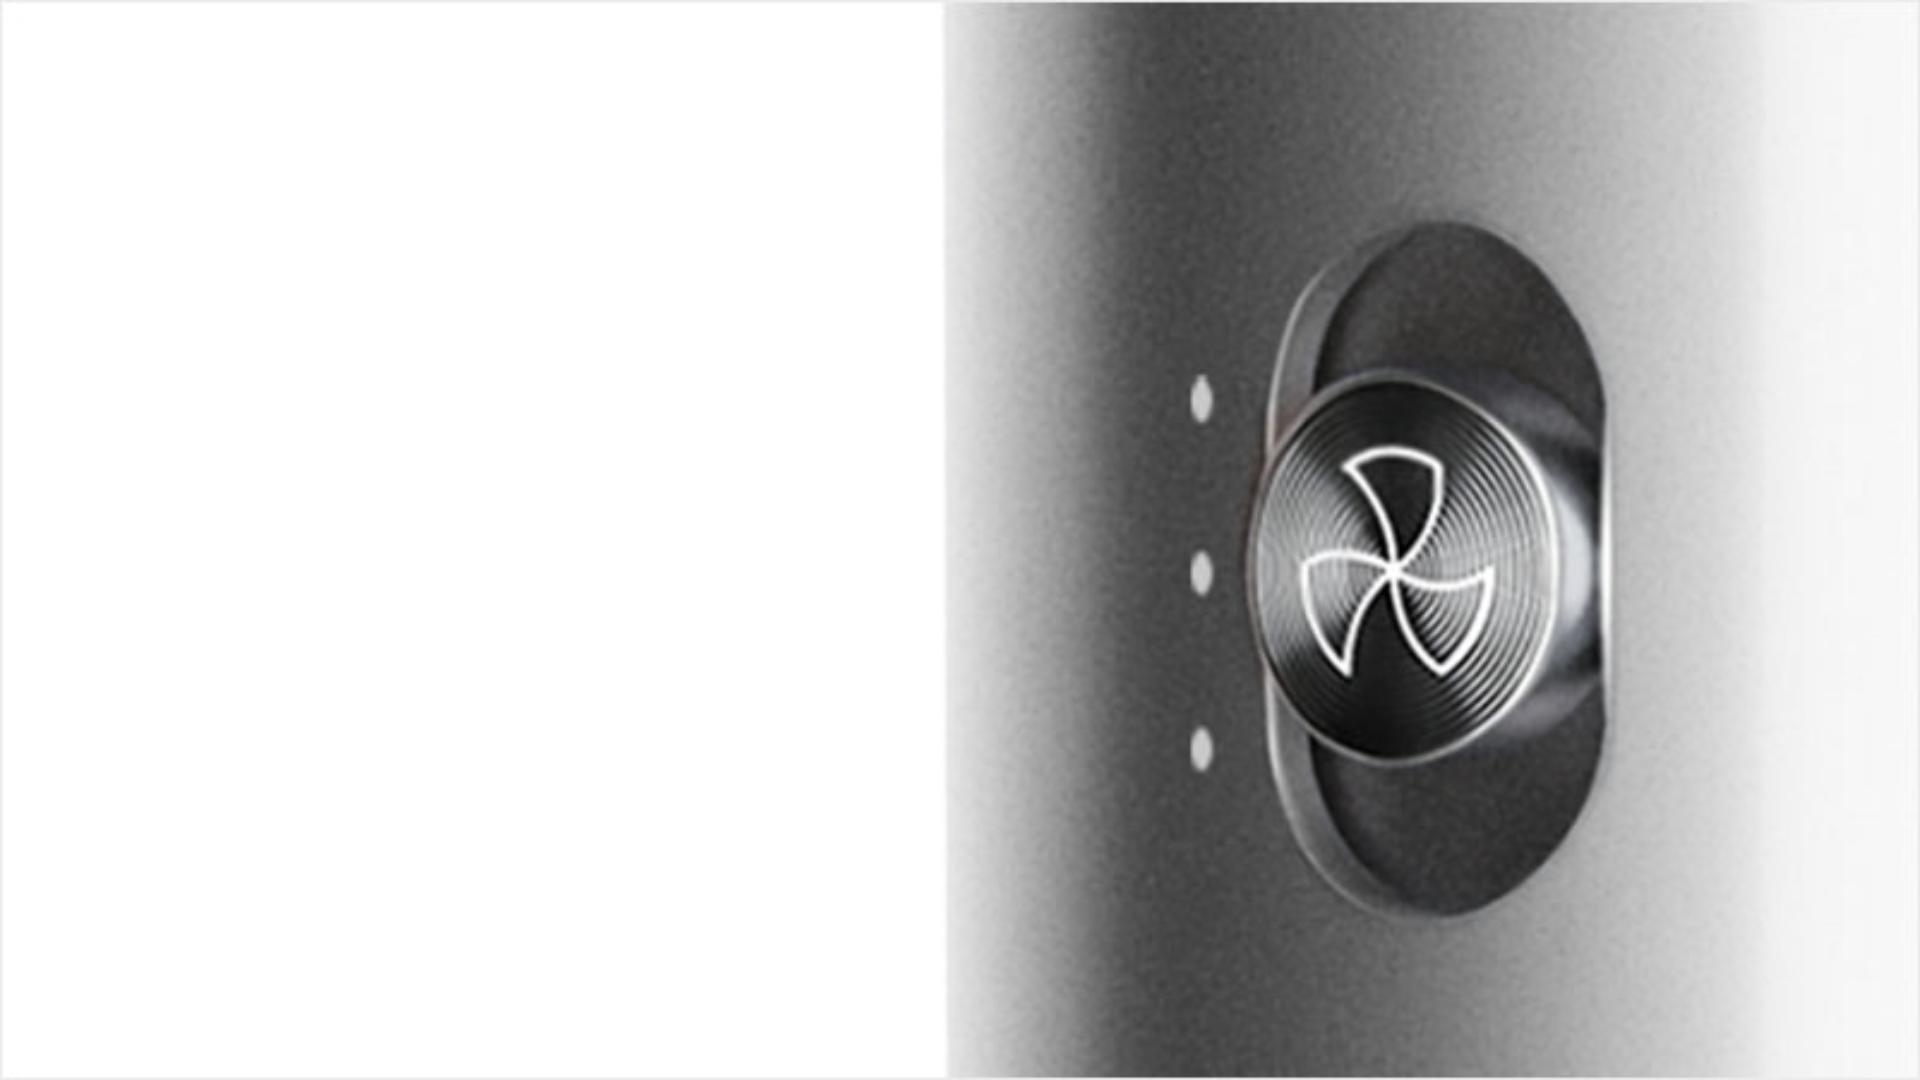 The airflow controls on the Dyson Airwrap multi-styler.